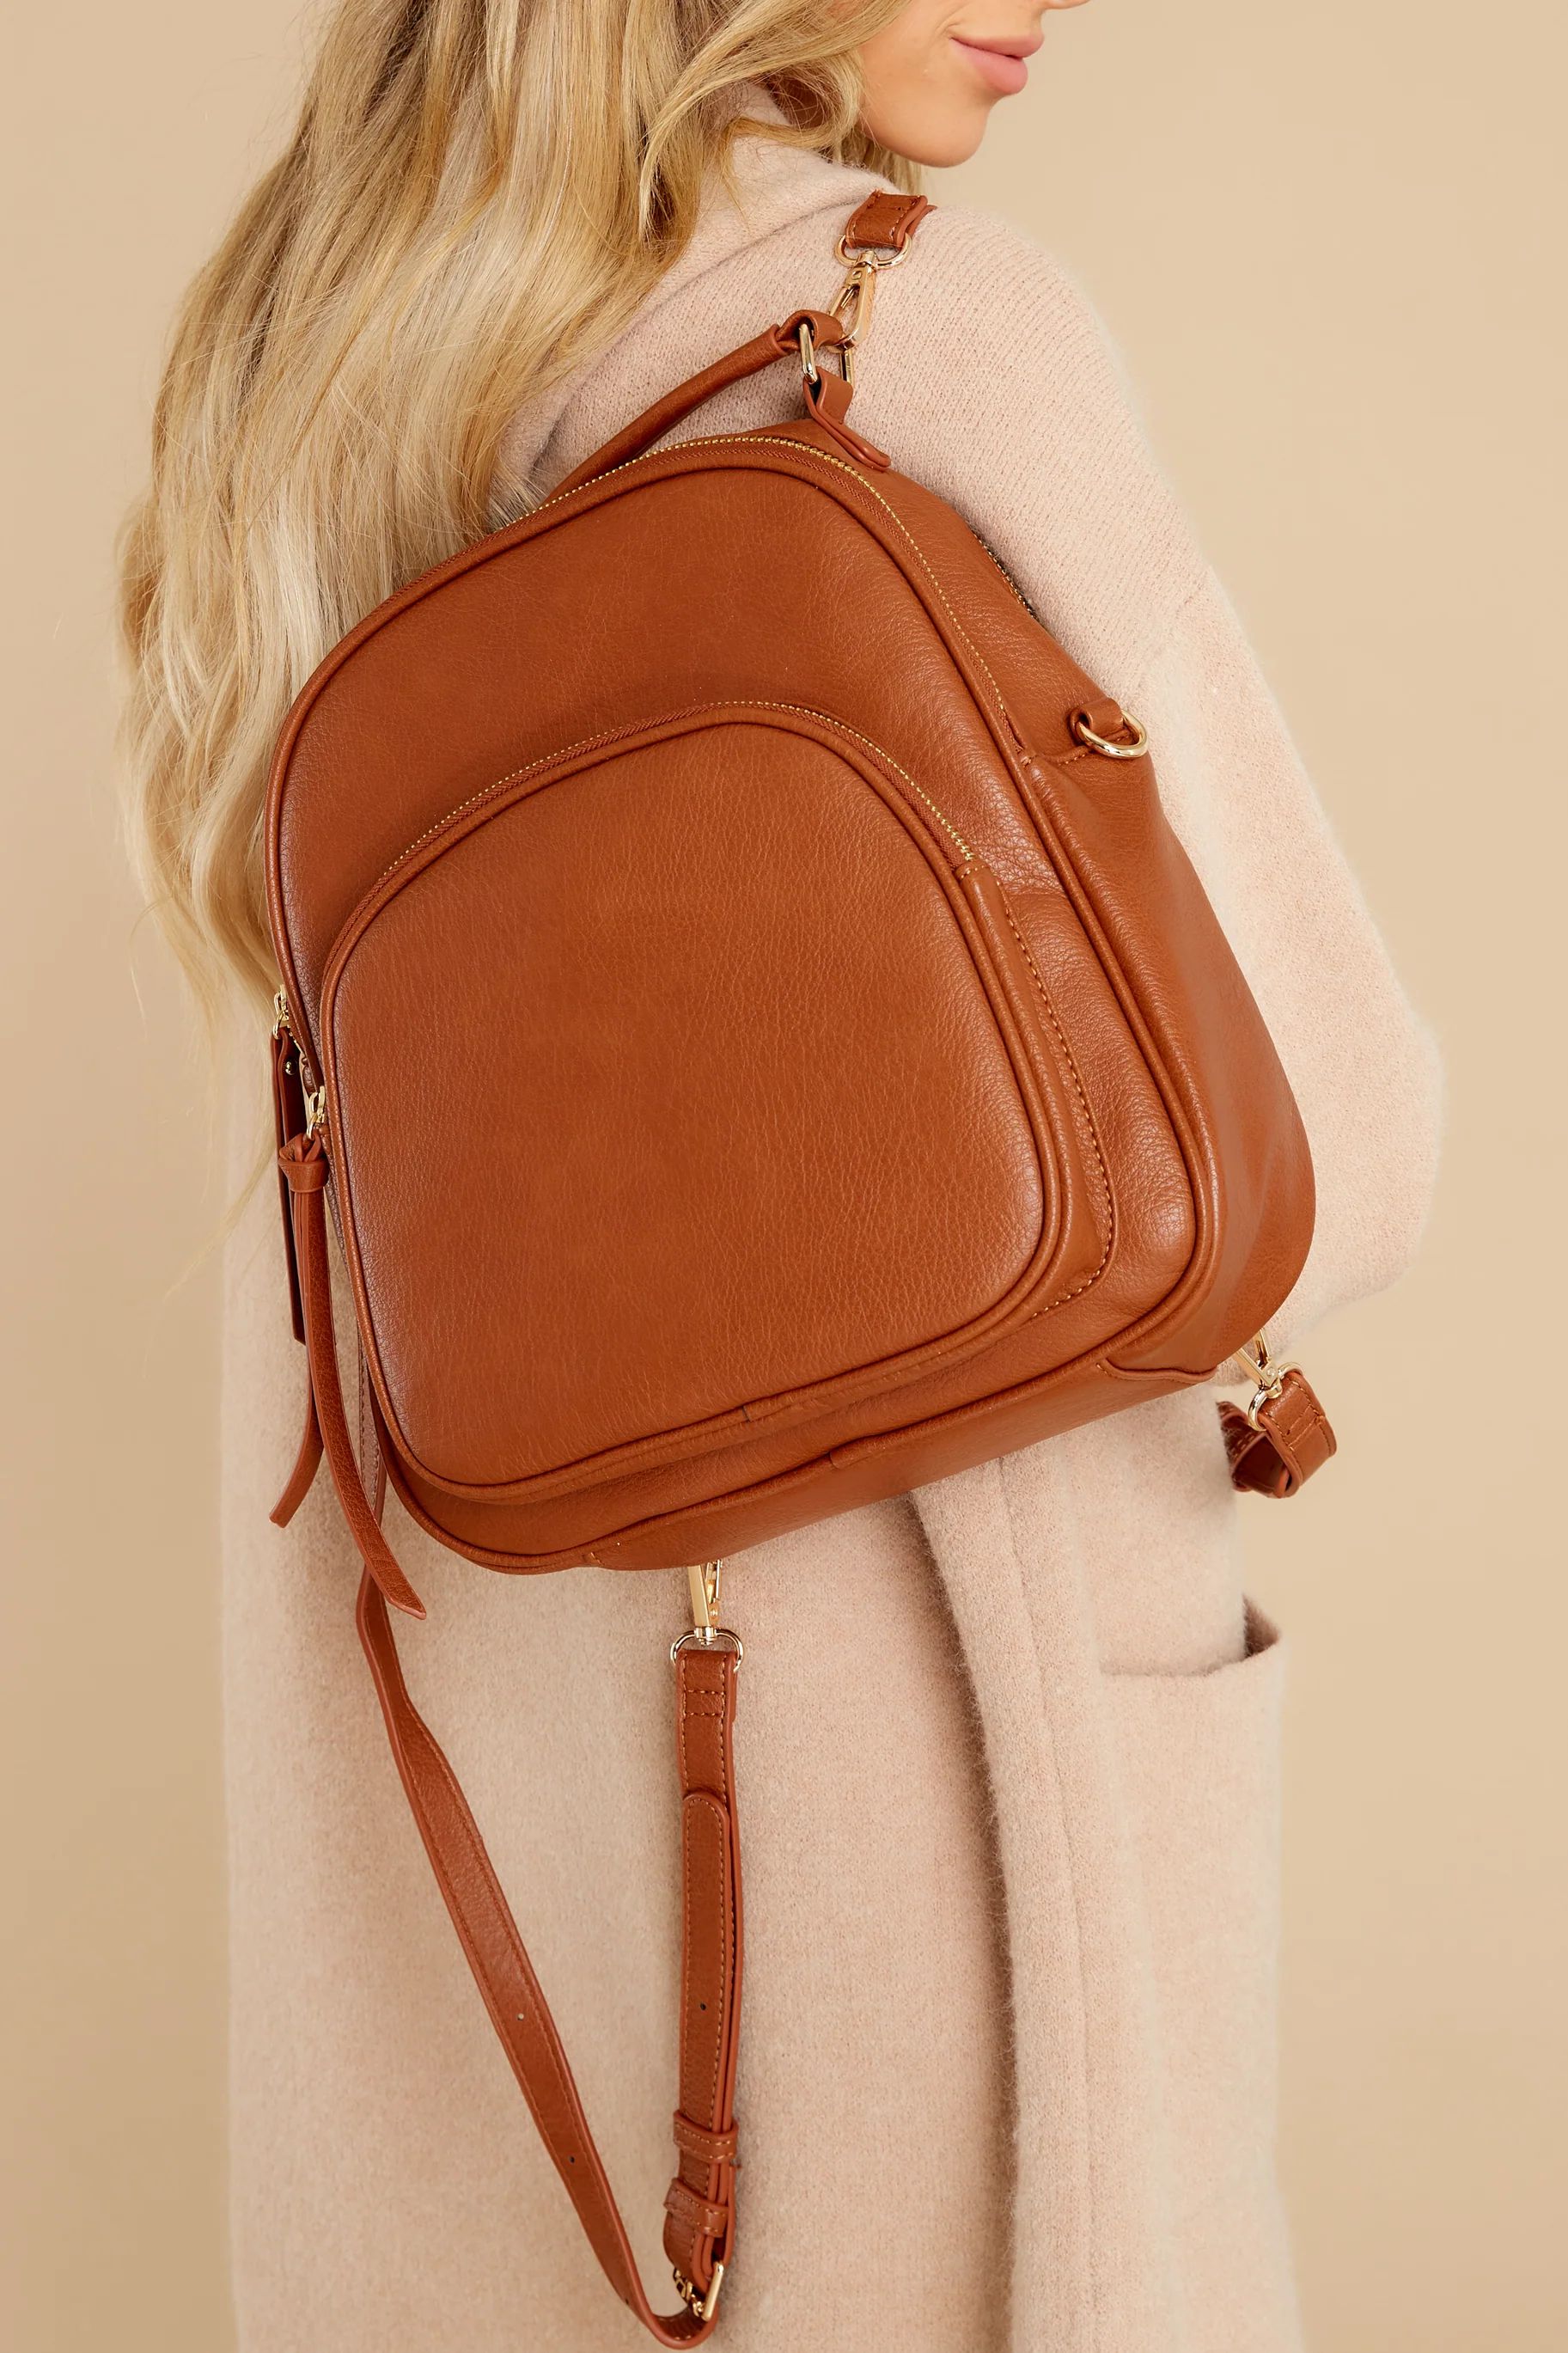 Sort It Out Cognac Backpack | Red Dress 